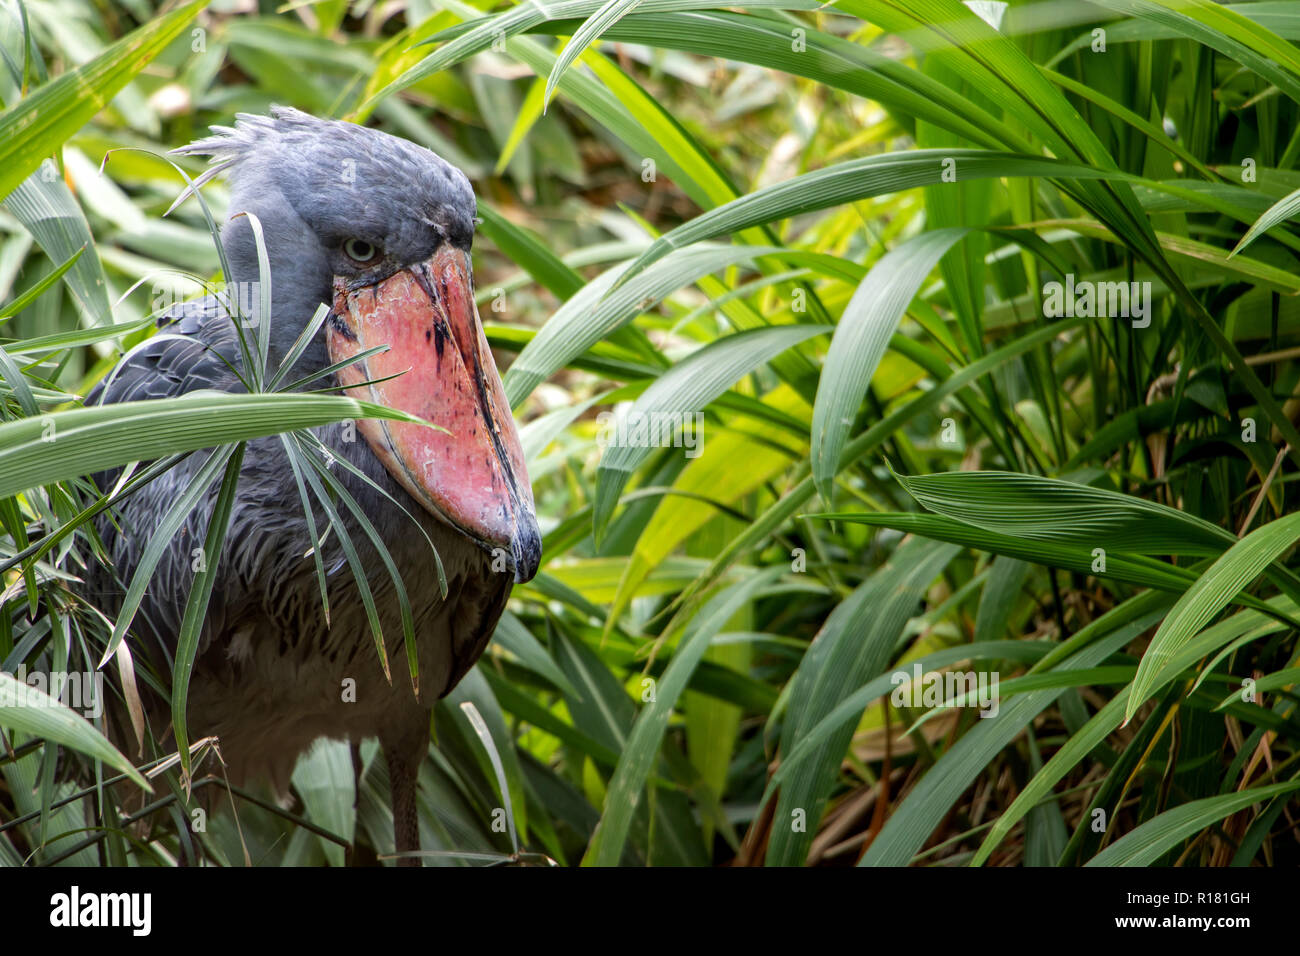 Shoebill (Balaeniceps rex) also known as Whalehead, standing in green grass. Stock Photo